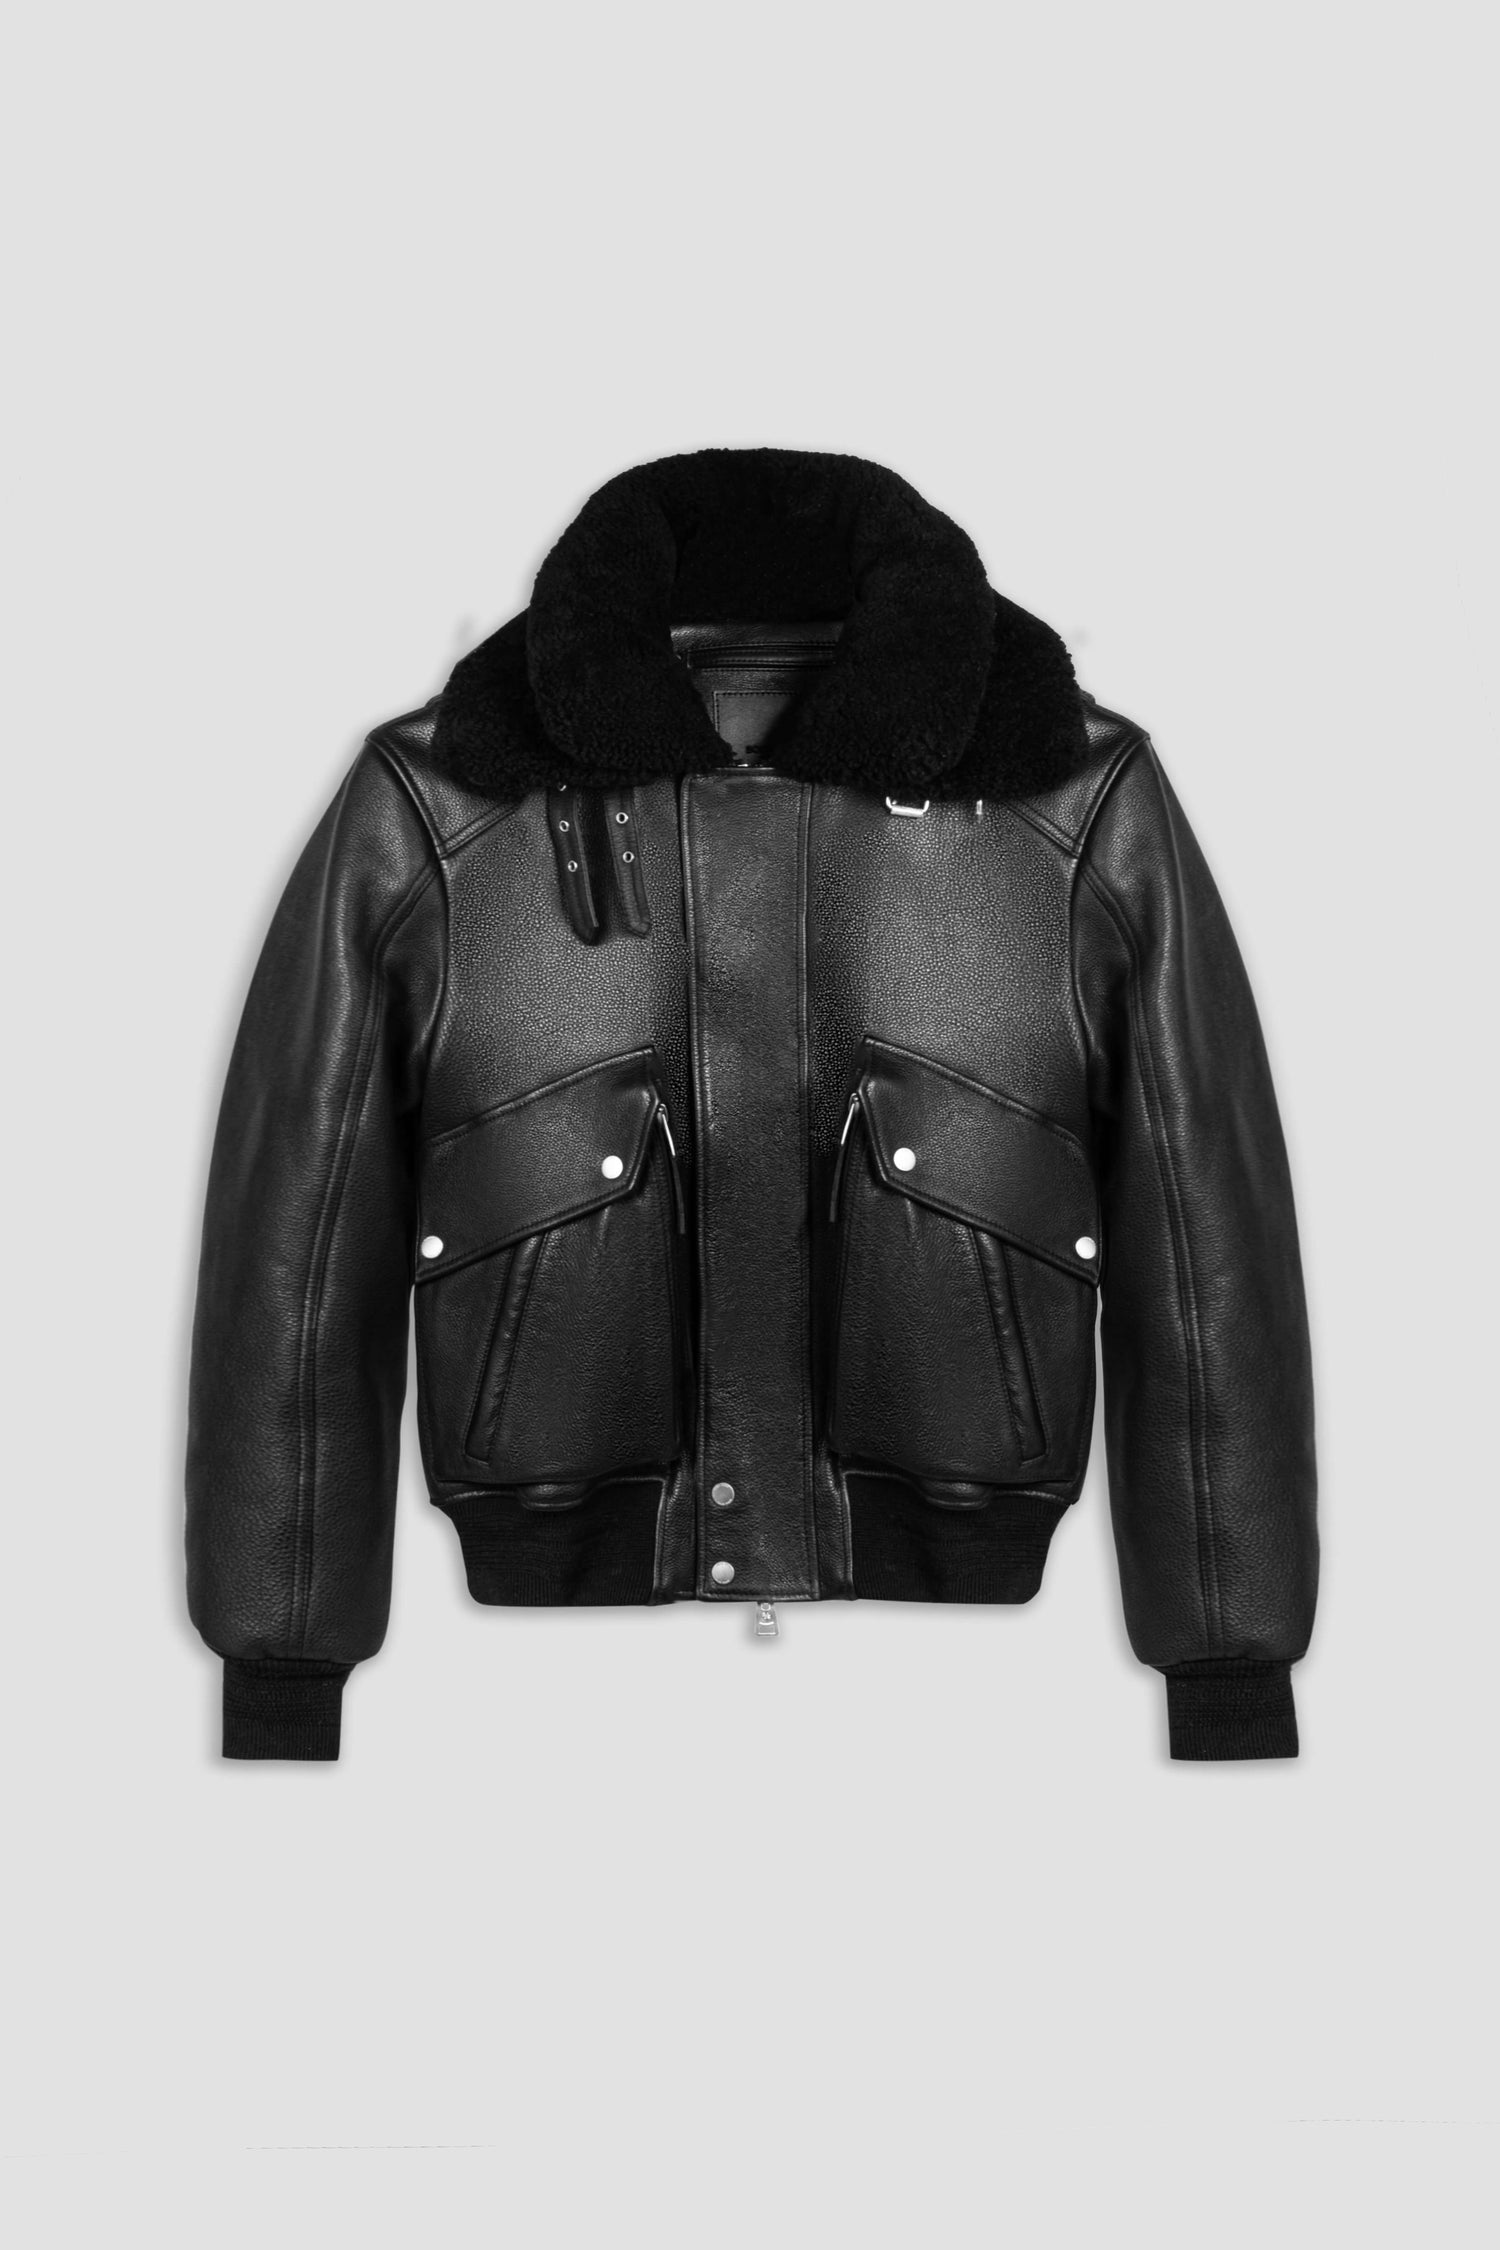 Womens Leather Jackets - By Price: Highest to Lowest